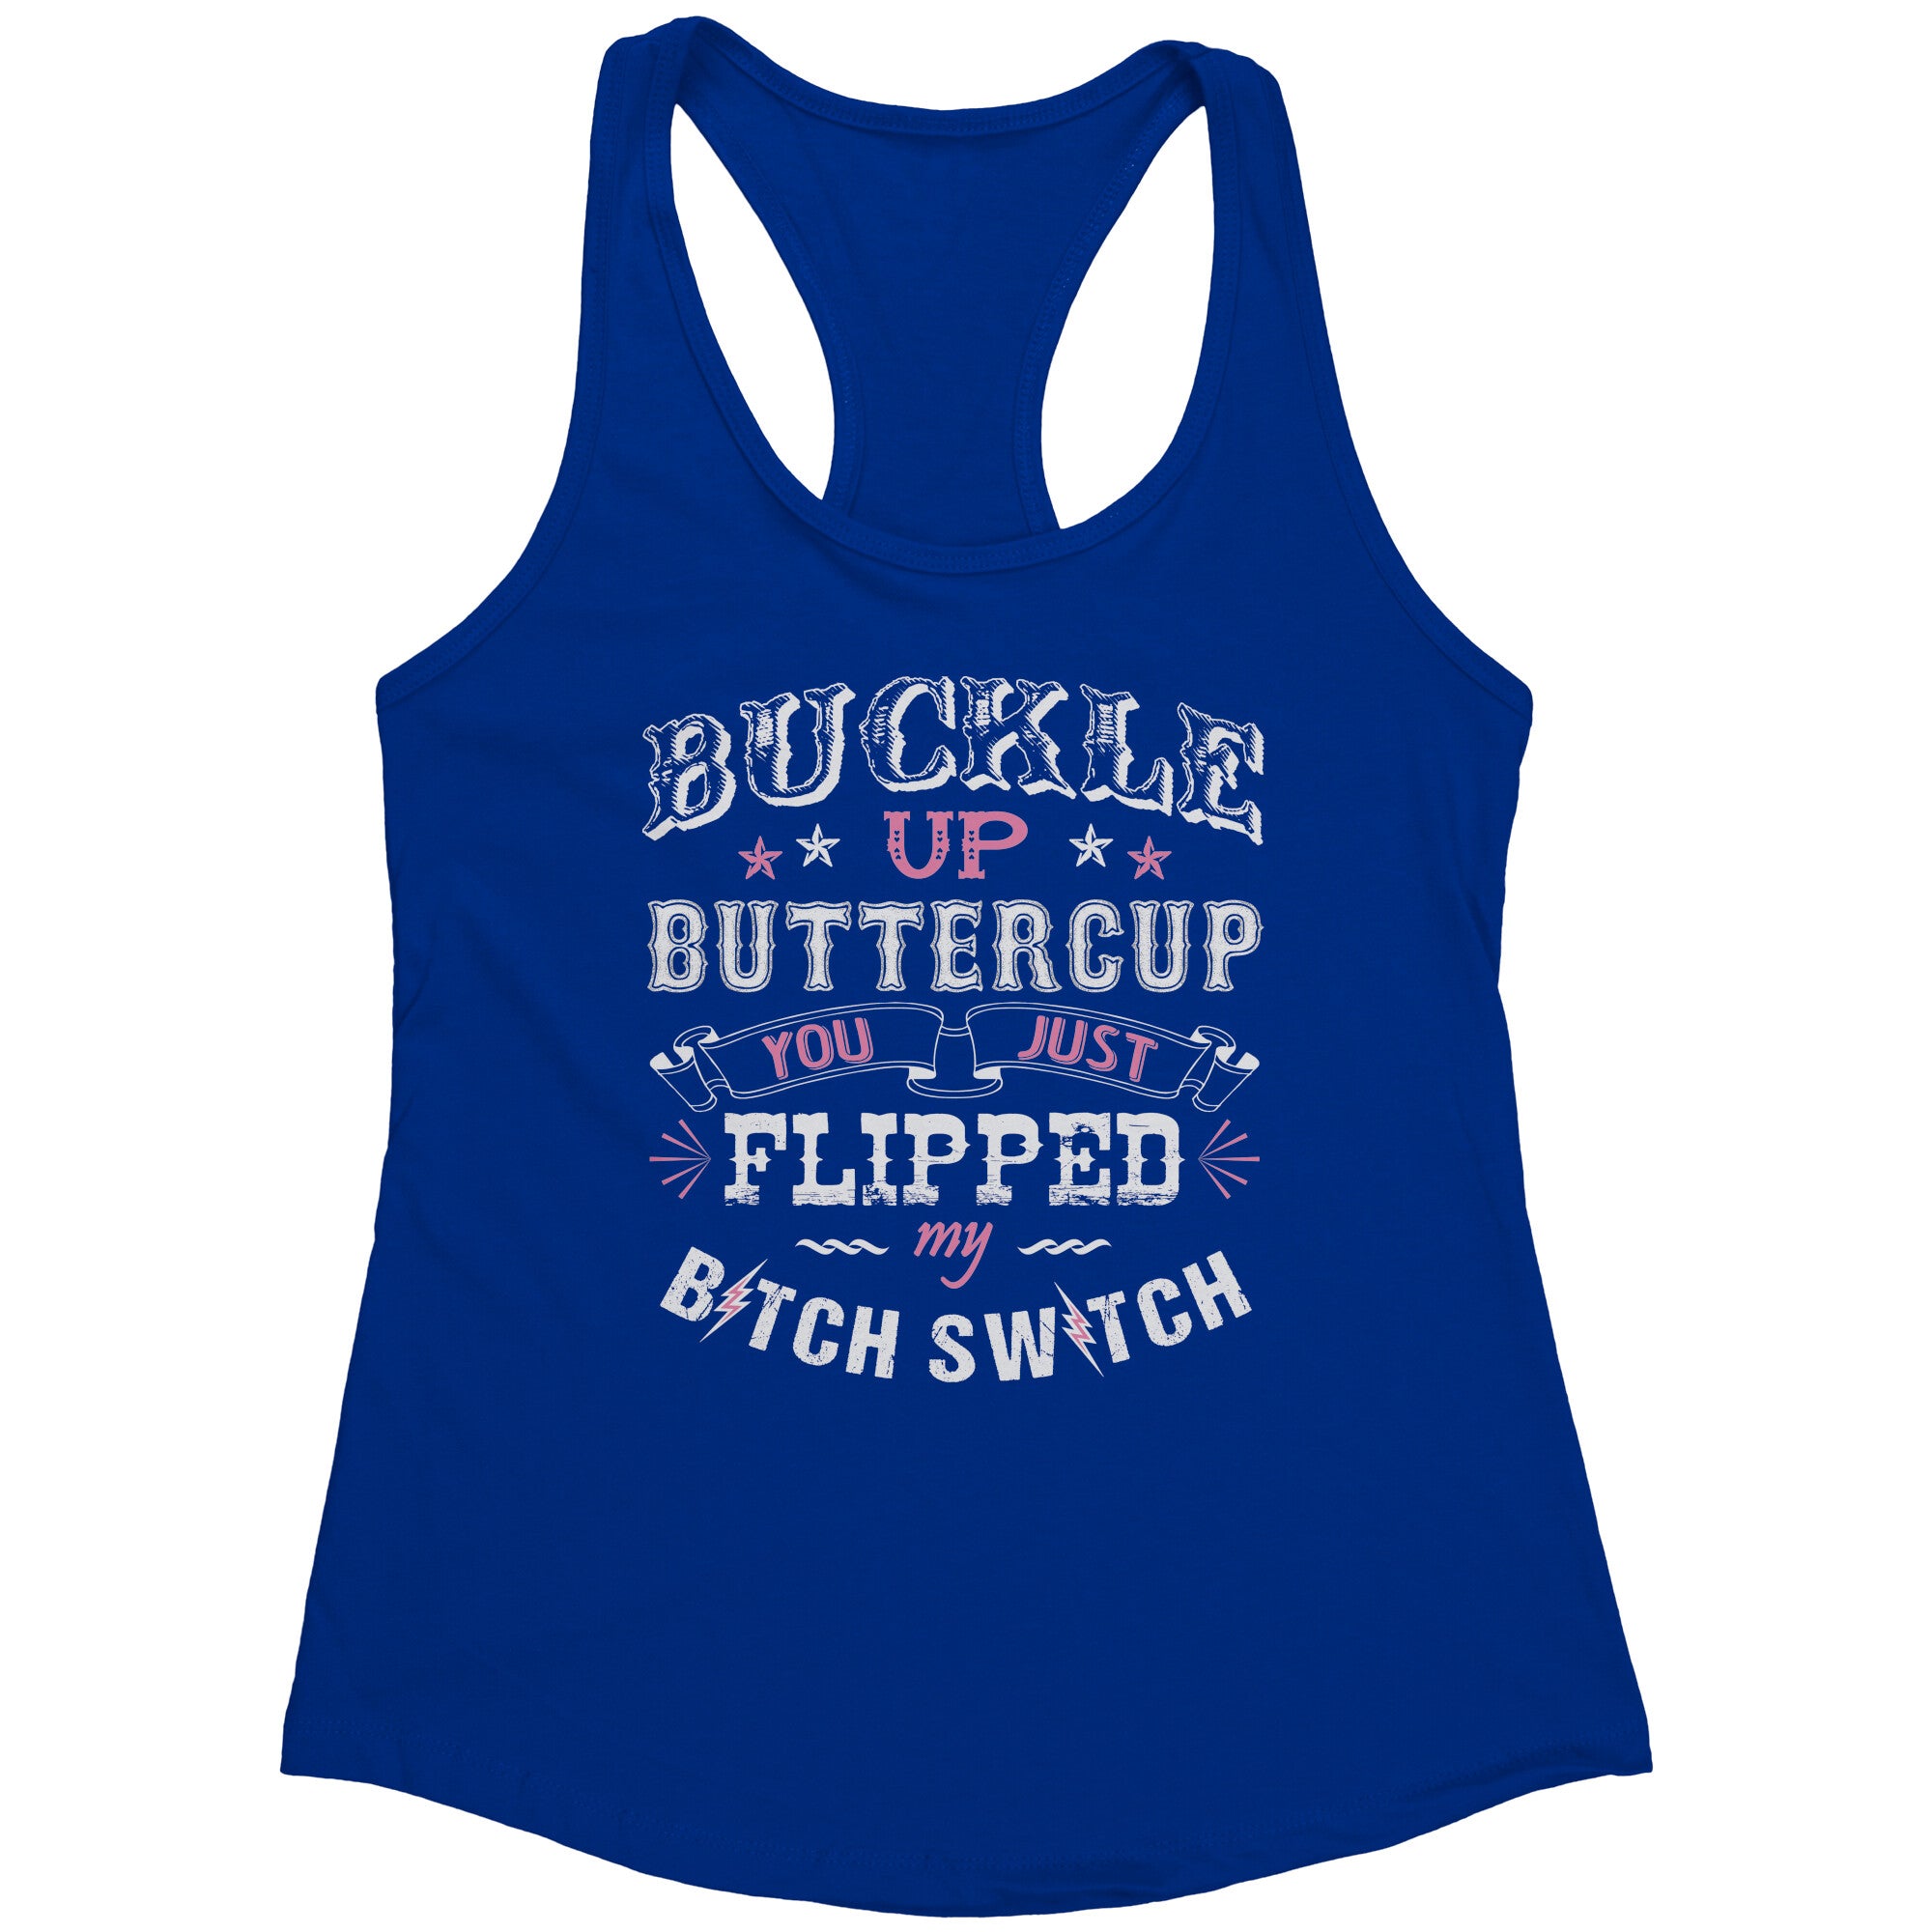 Buckle Up Buttercup Tank